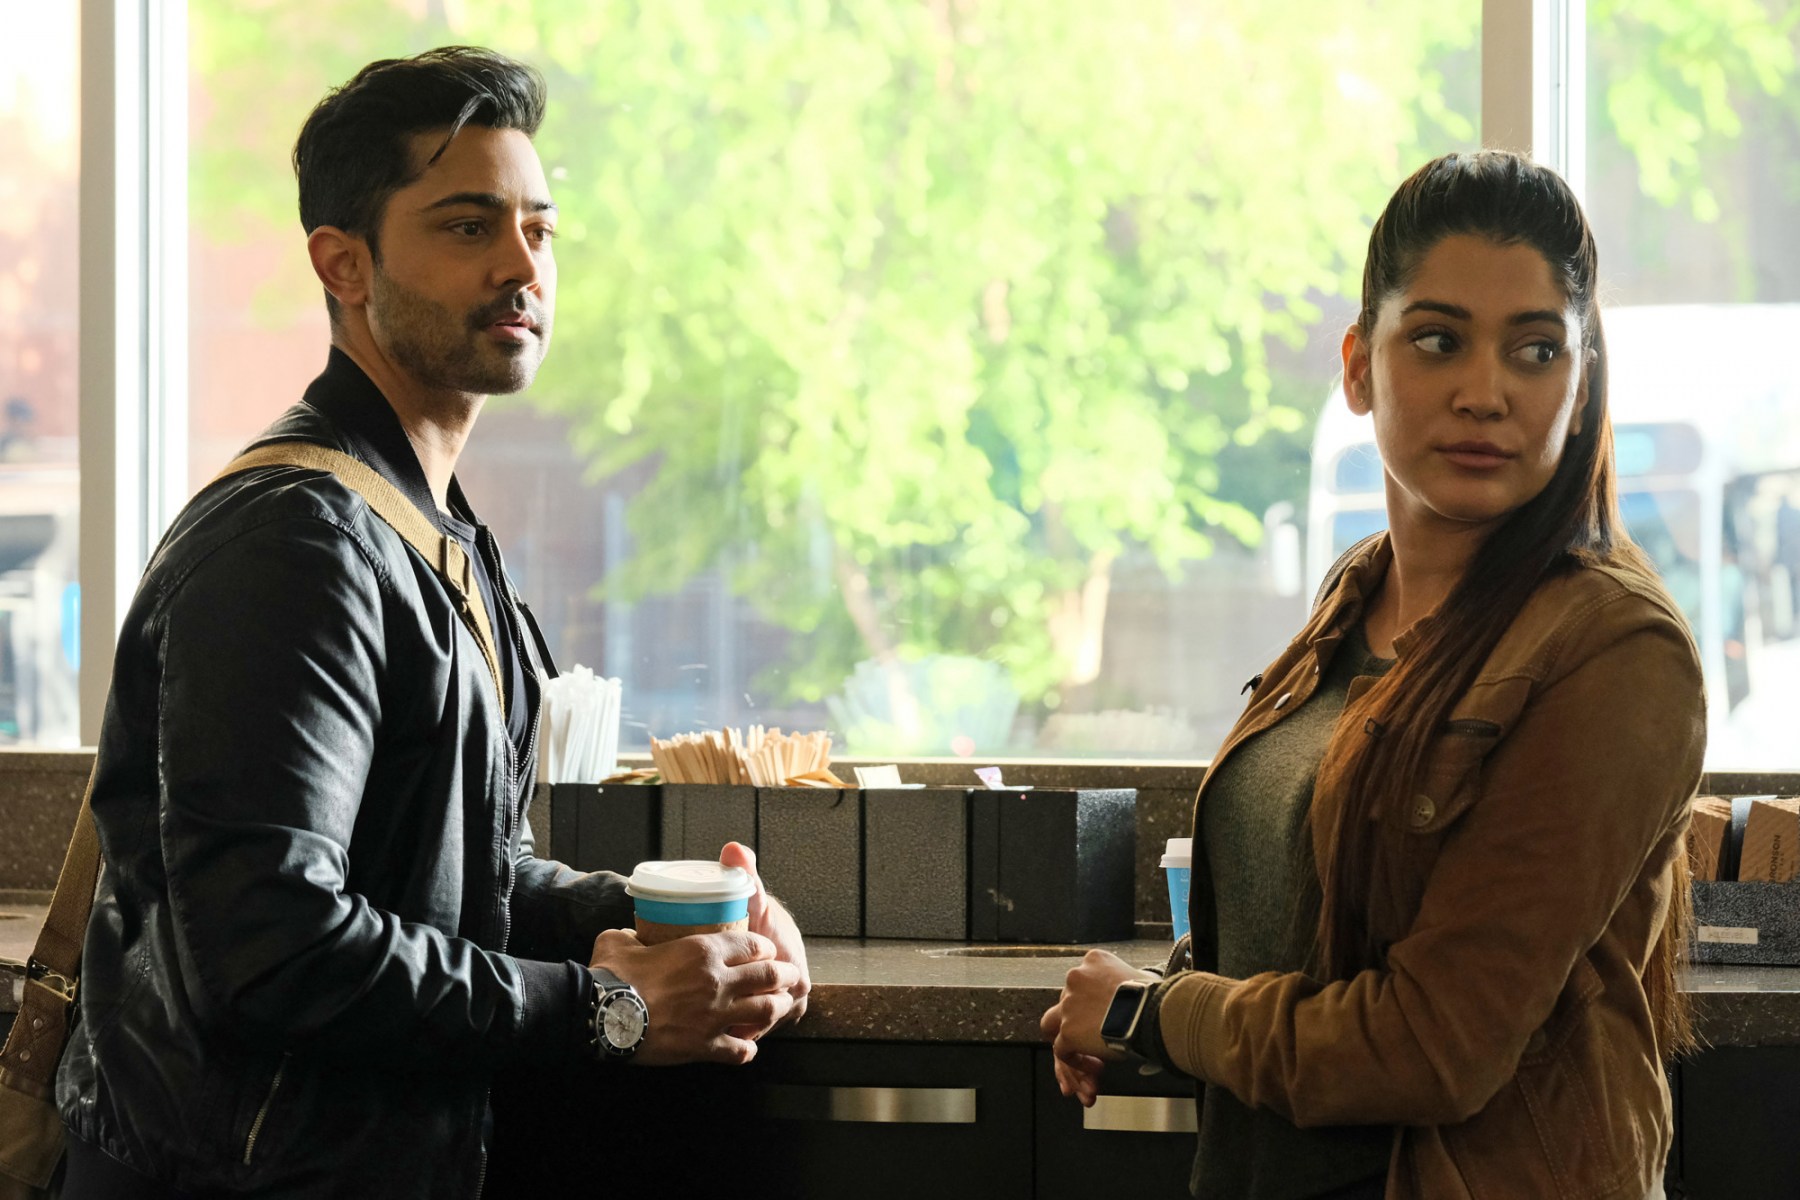 THE RESIDENT: L-R: Manish Dayal and guest star Anuja Joshi in the “Finding Family” episode of THE RESIDENT airing Tuesday, May 11 (8:00-9:01 PM ET/PT) on FOX. ©2021 Fox Media LLC Cr: Guy D'Alema/FOX